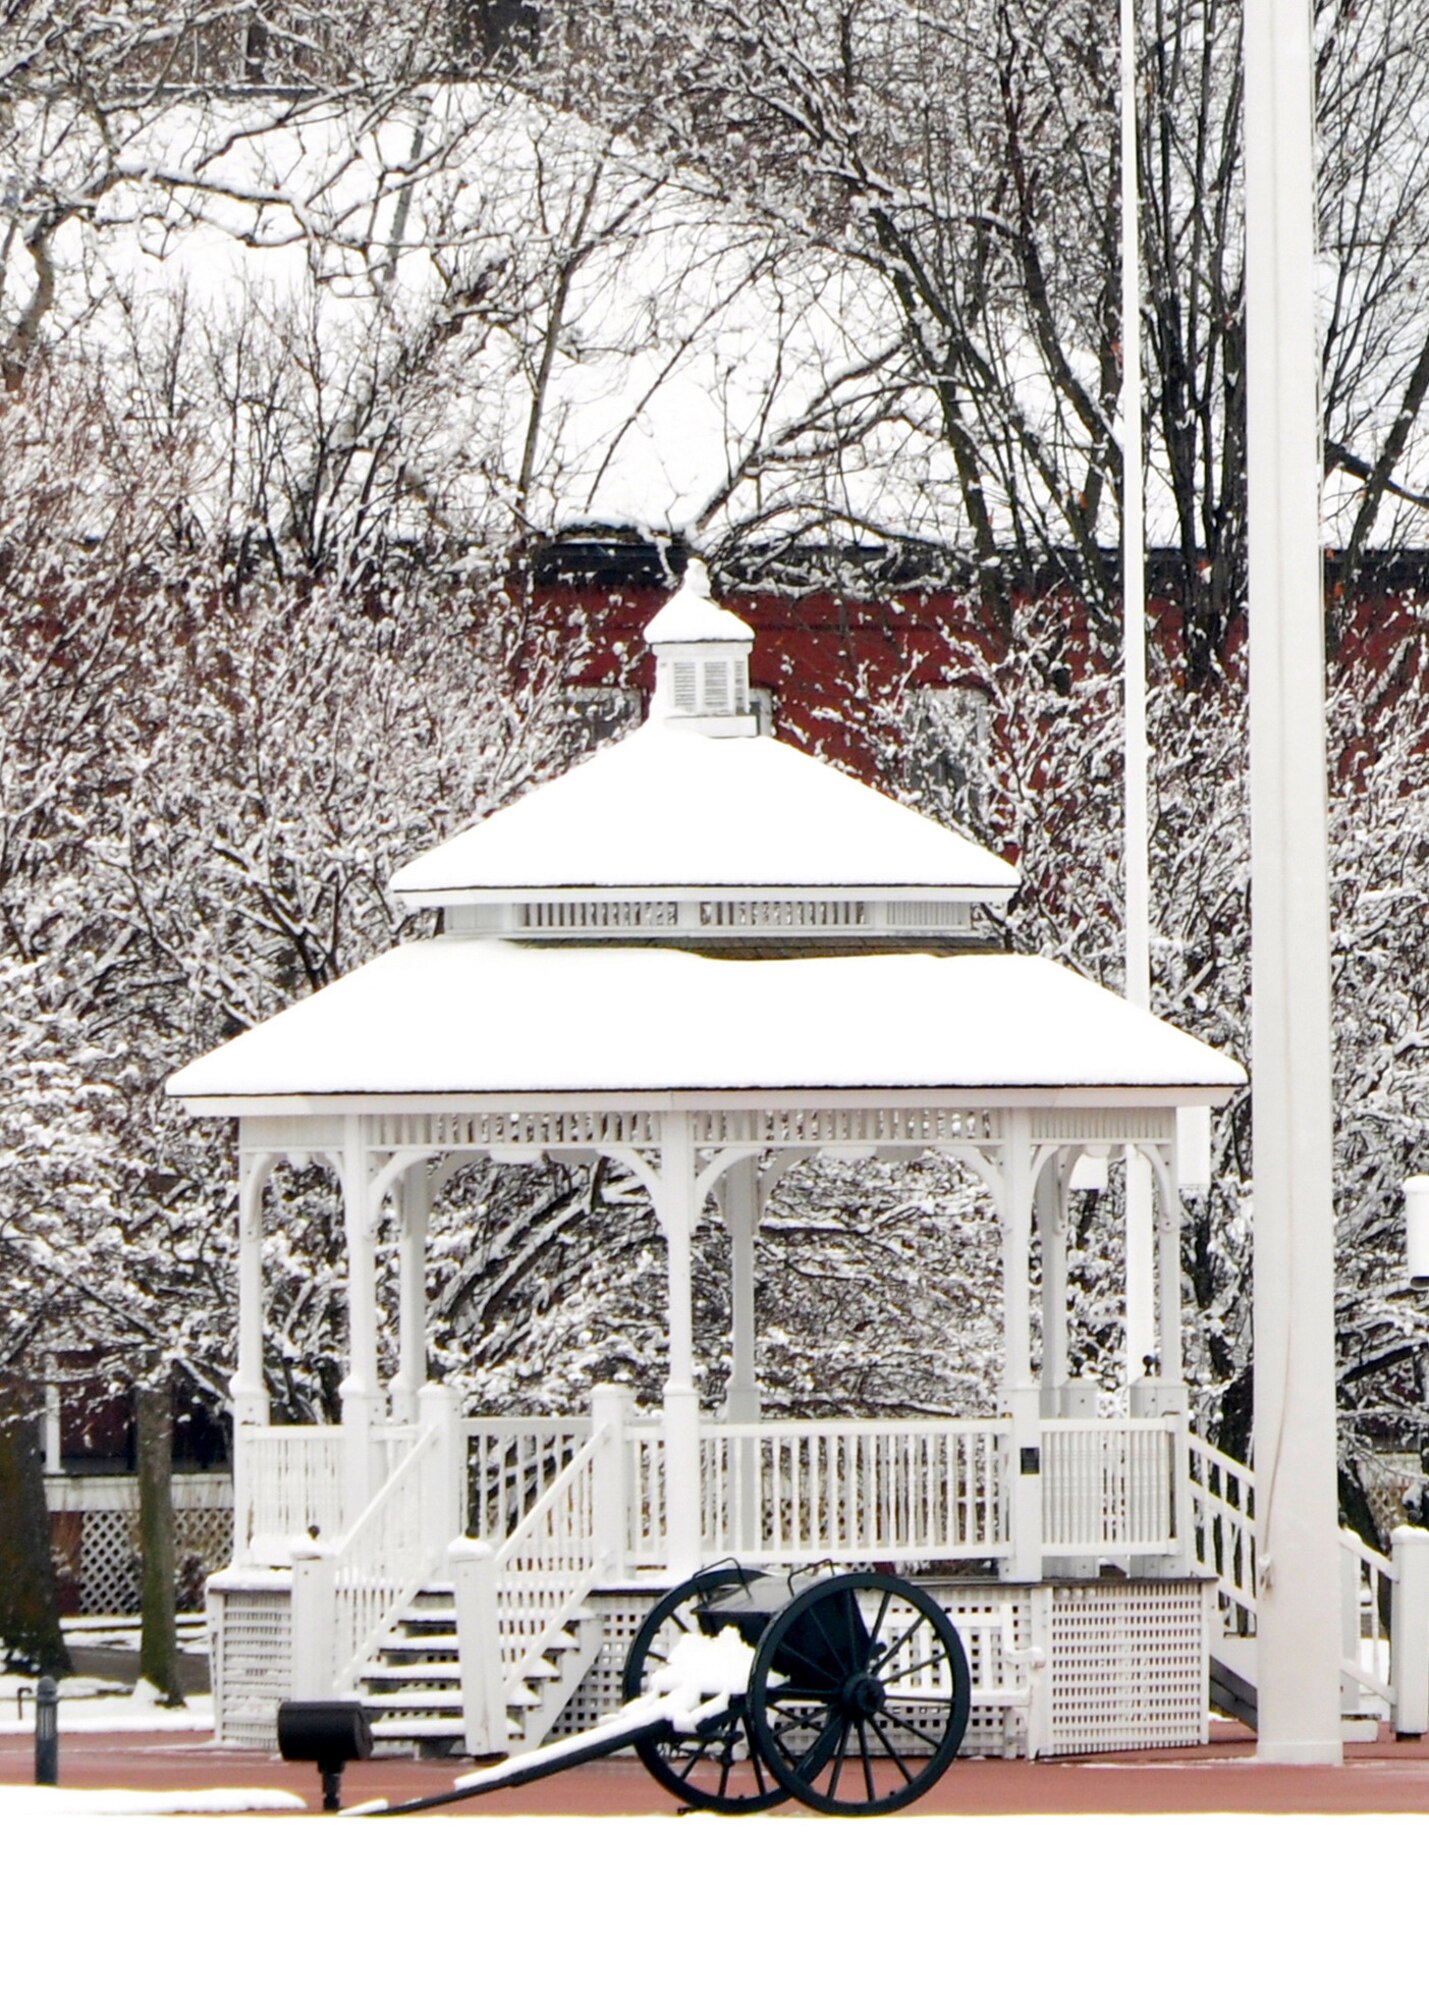 snow resting on gazebo on parade grounds, with cannon in the foreground